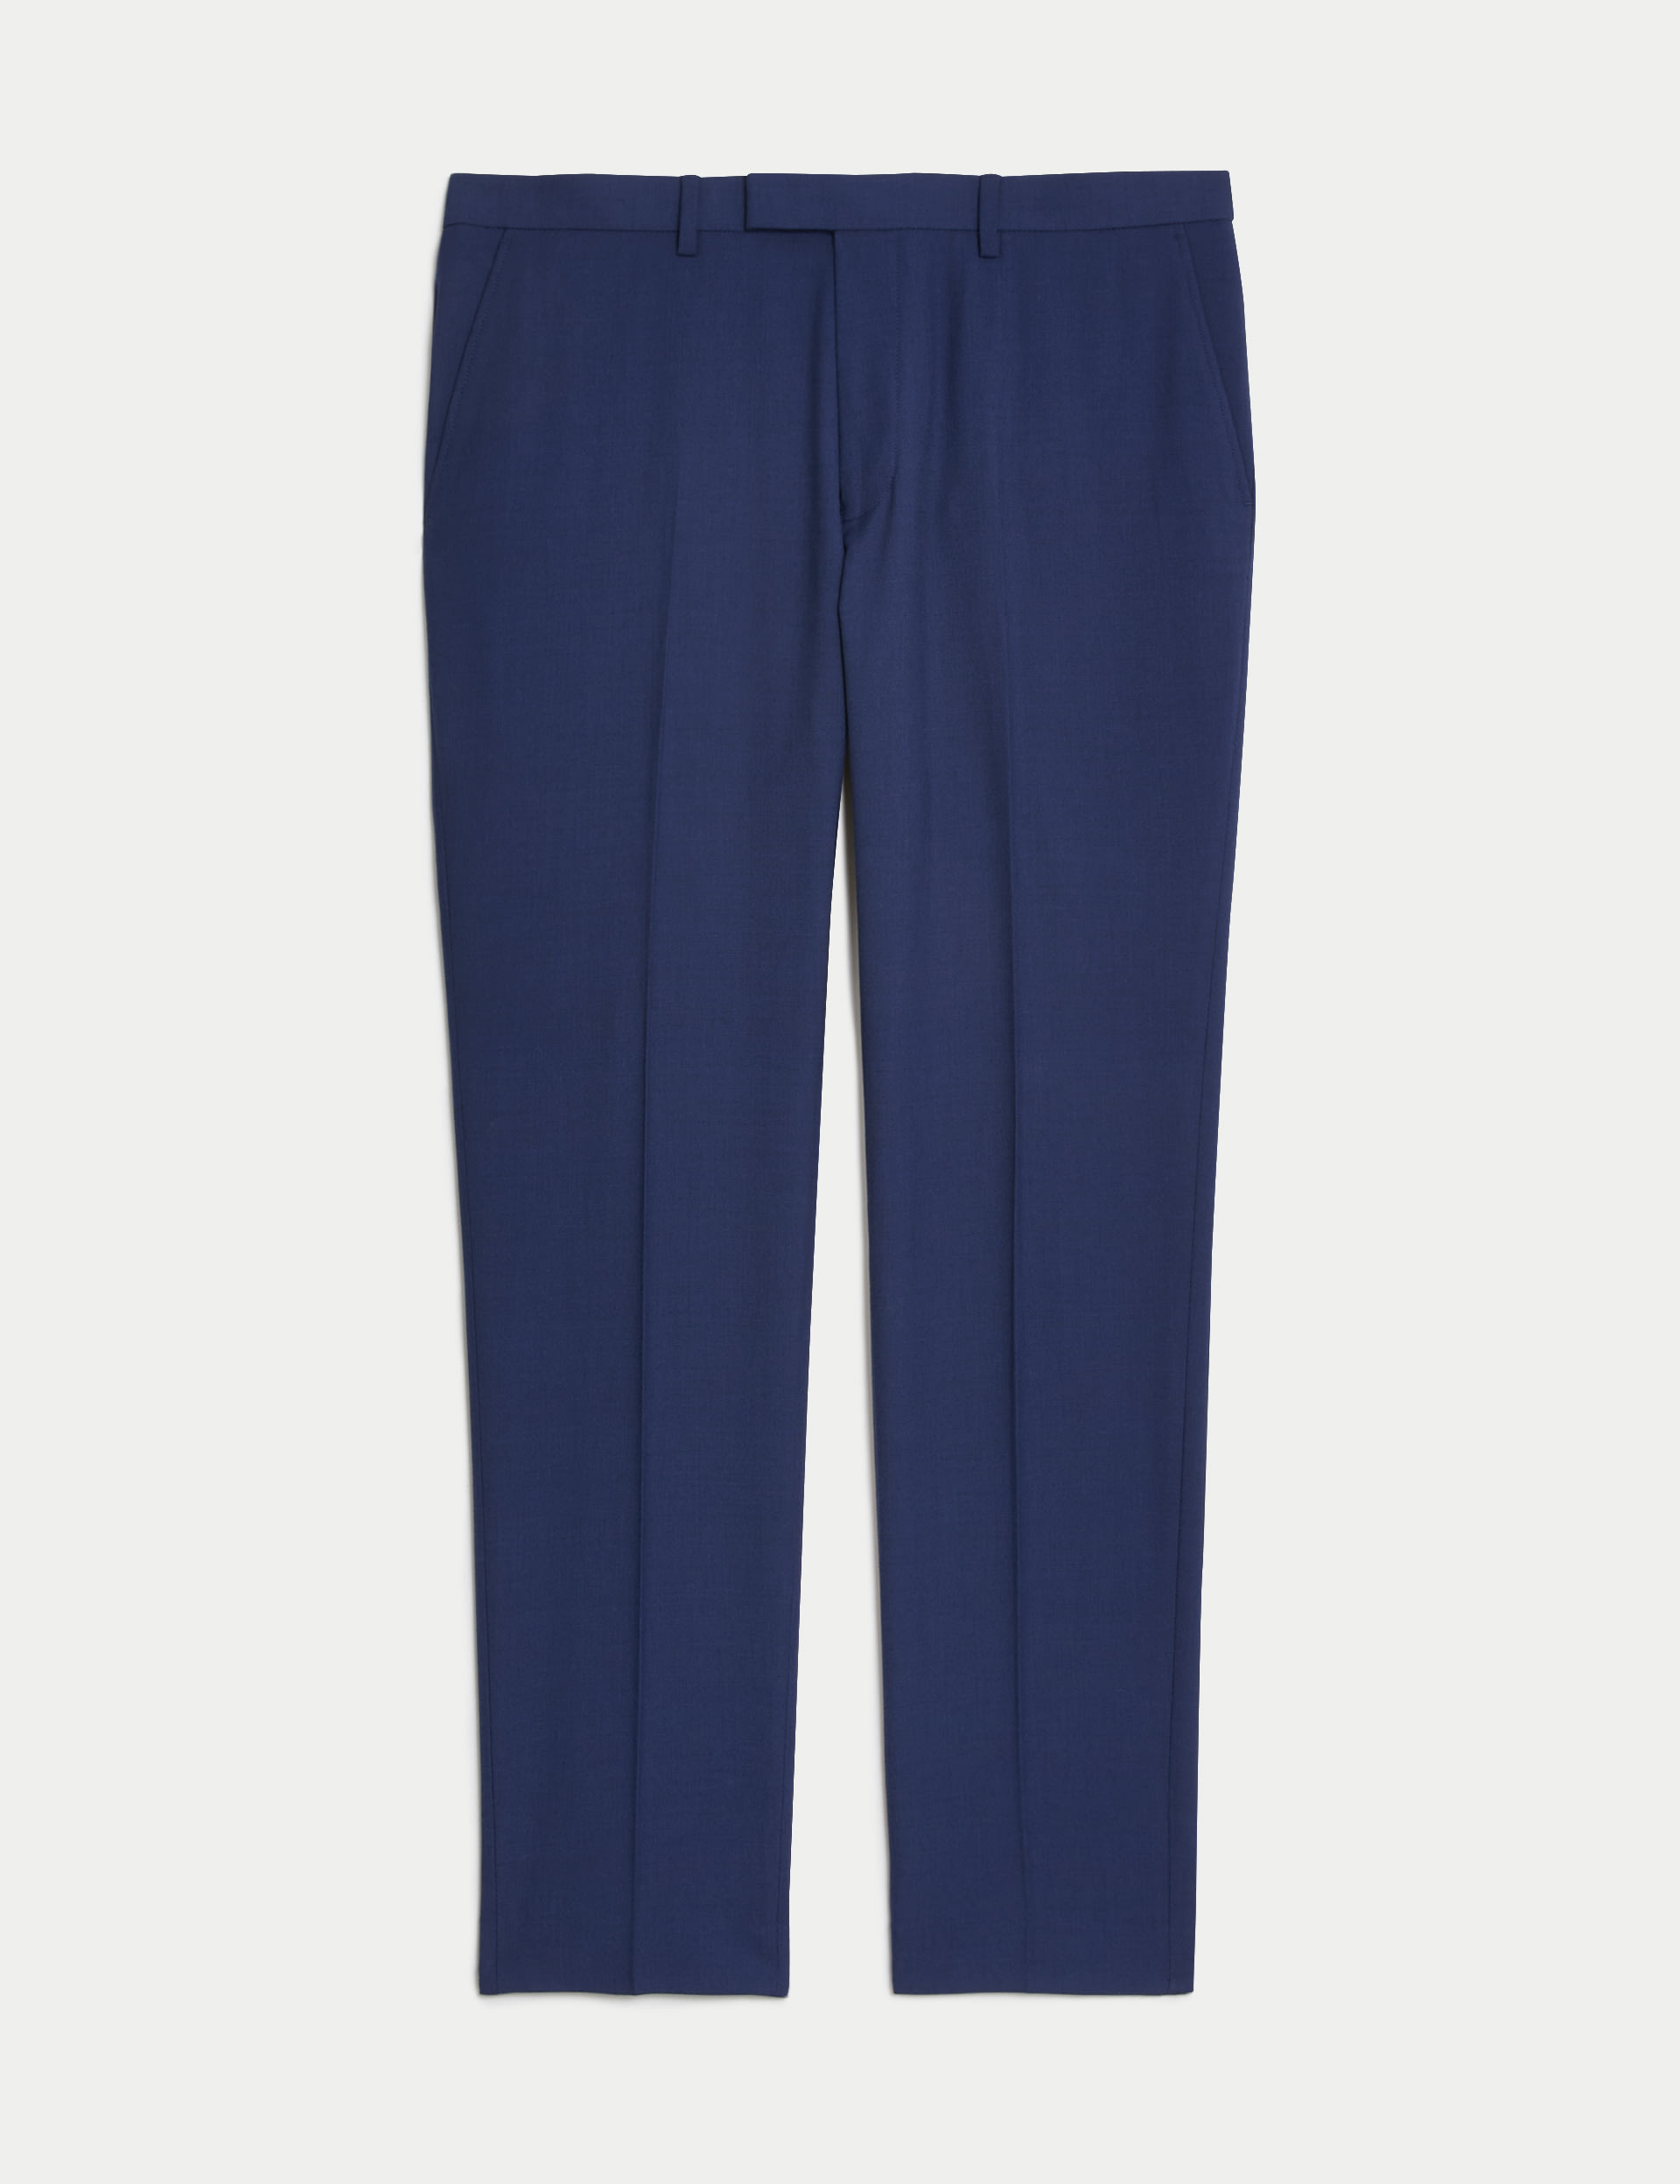 Skinny Fit Stretch Suit Trousers